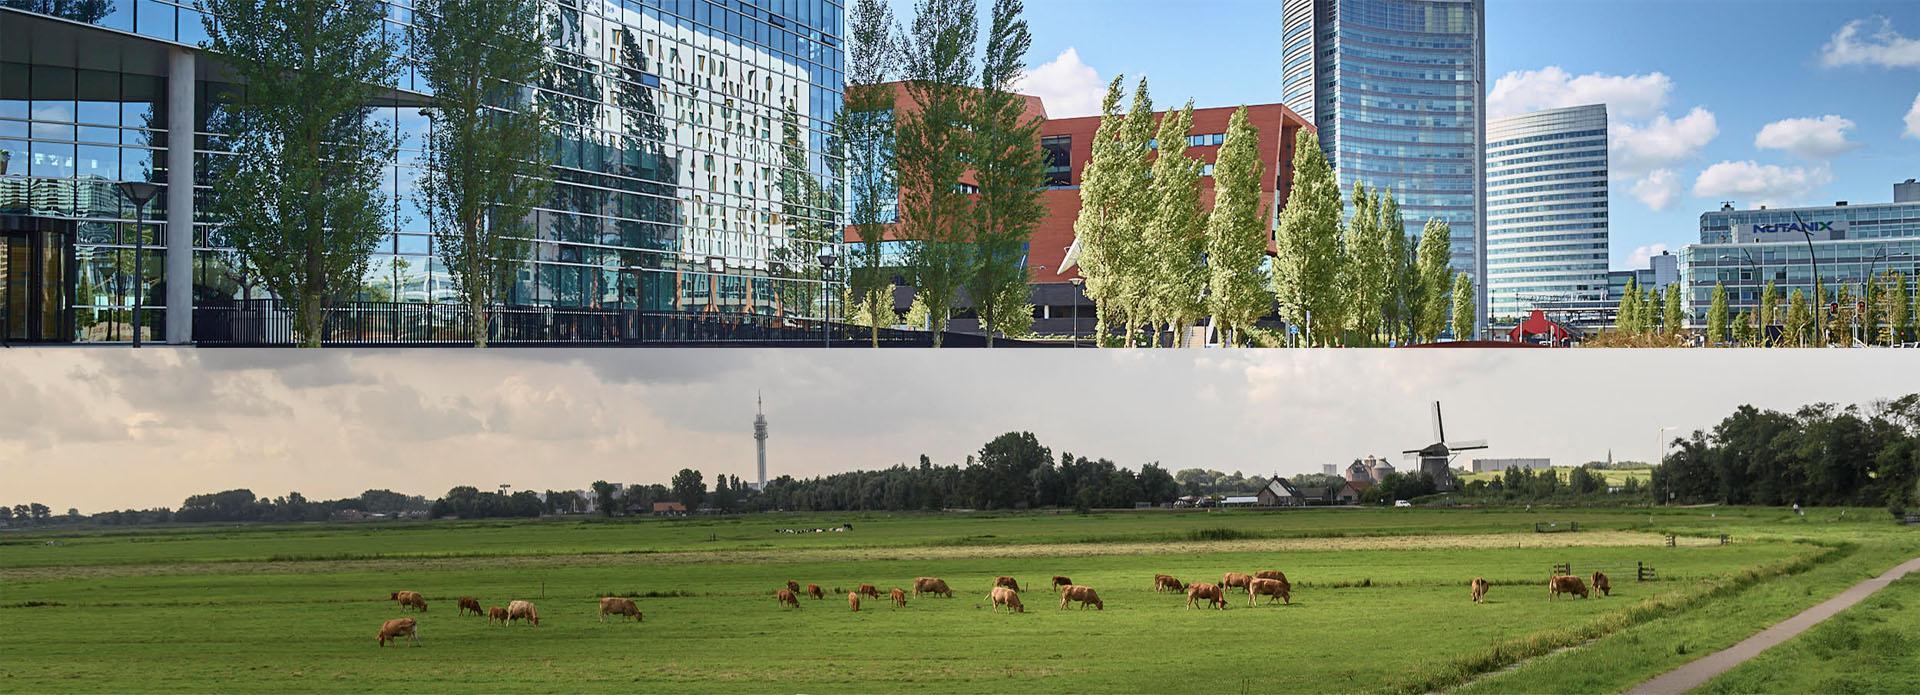 Urban office buildings and a green countryside in Amsterdam Airport City